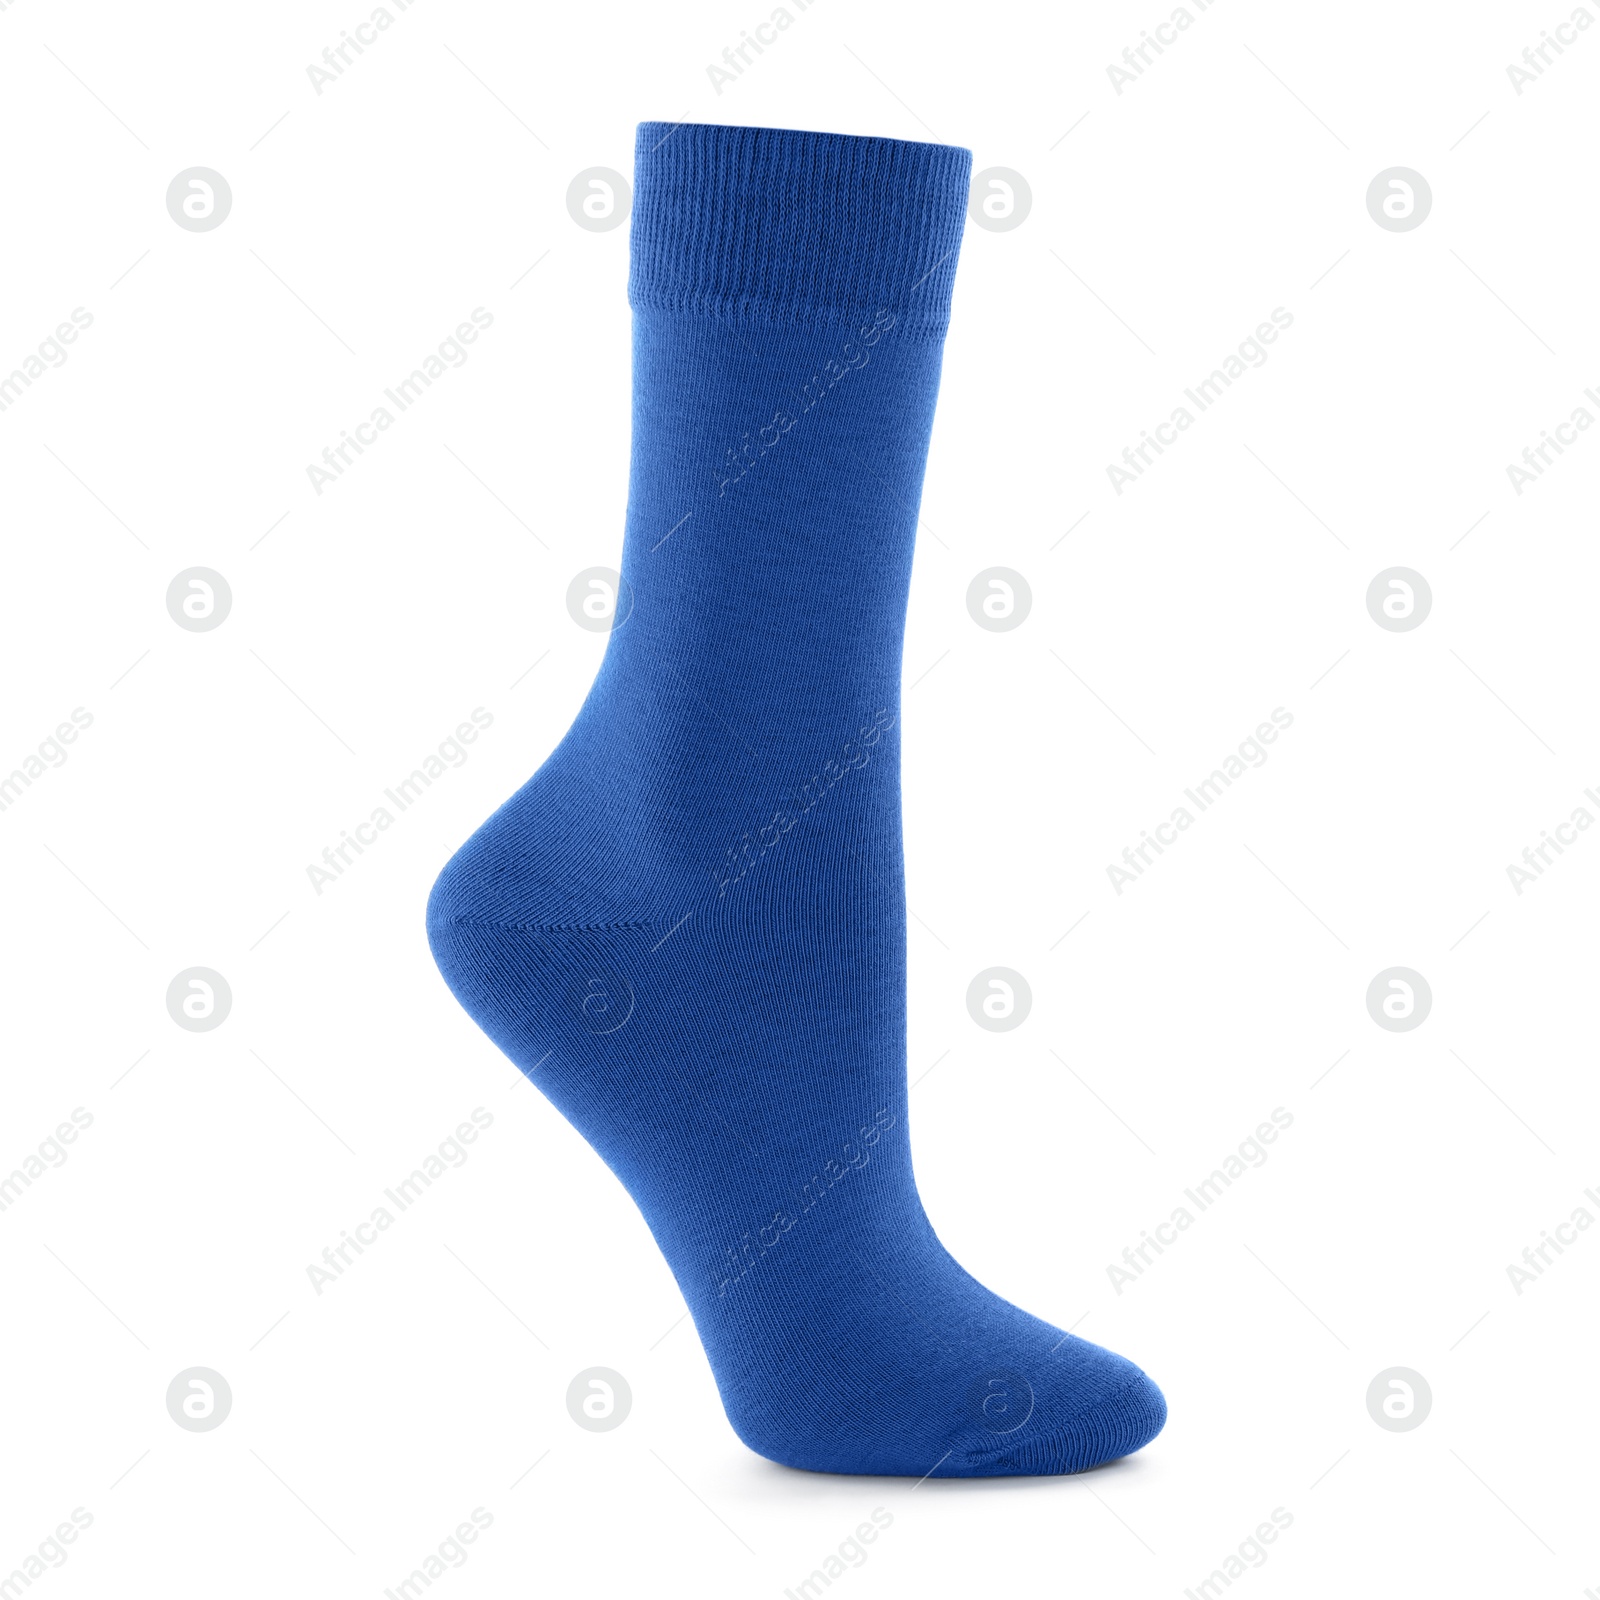 Photo of New blue sock isolated on white. Footwear accessory